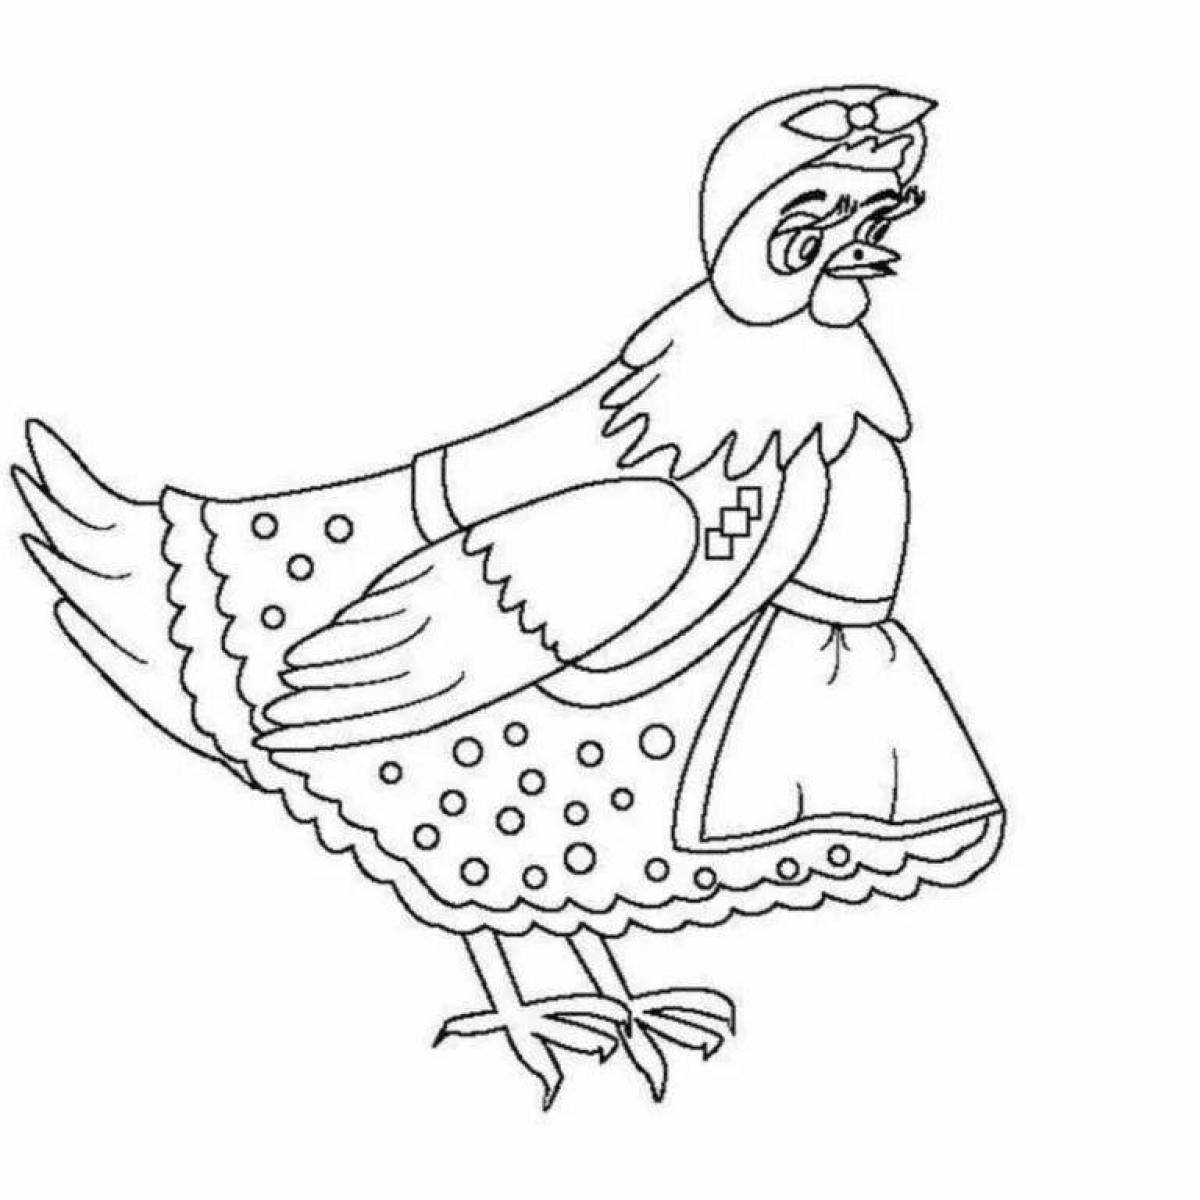 Glorious coloring fairy tale chicken pockmarked